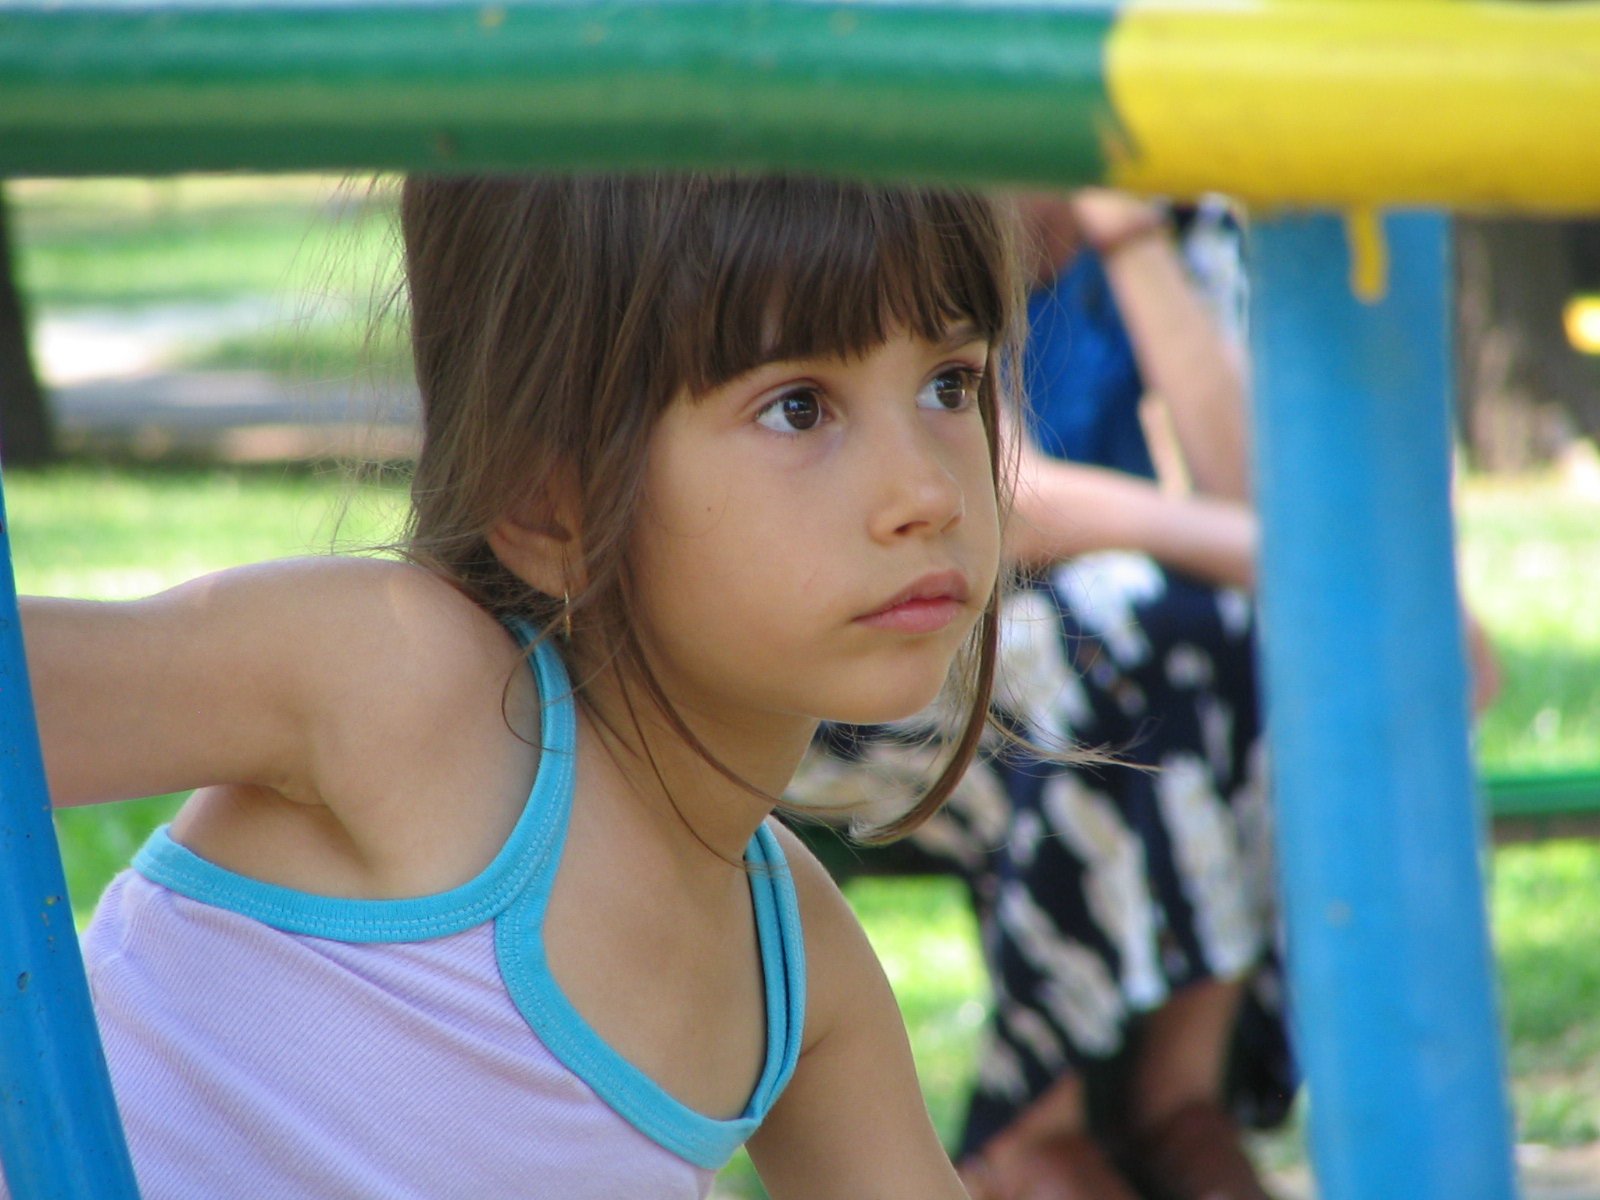 the young child in a blue and white tank top is on a swing